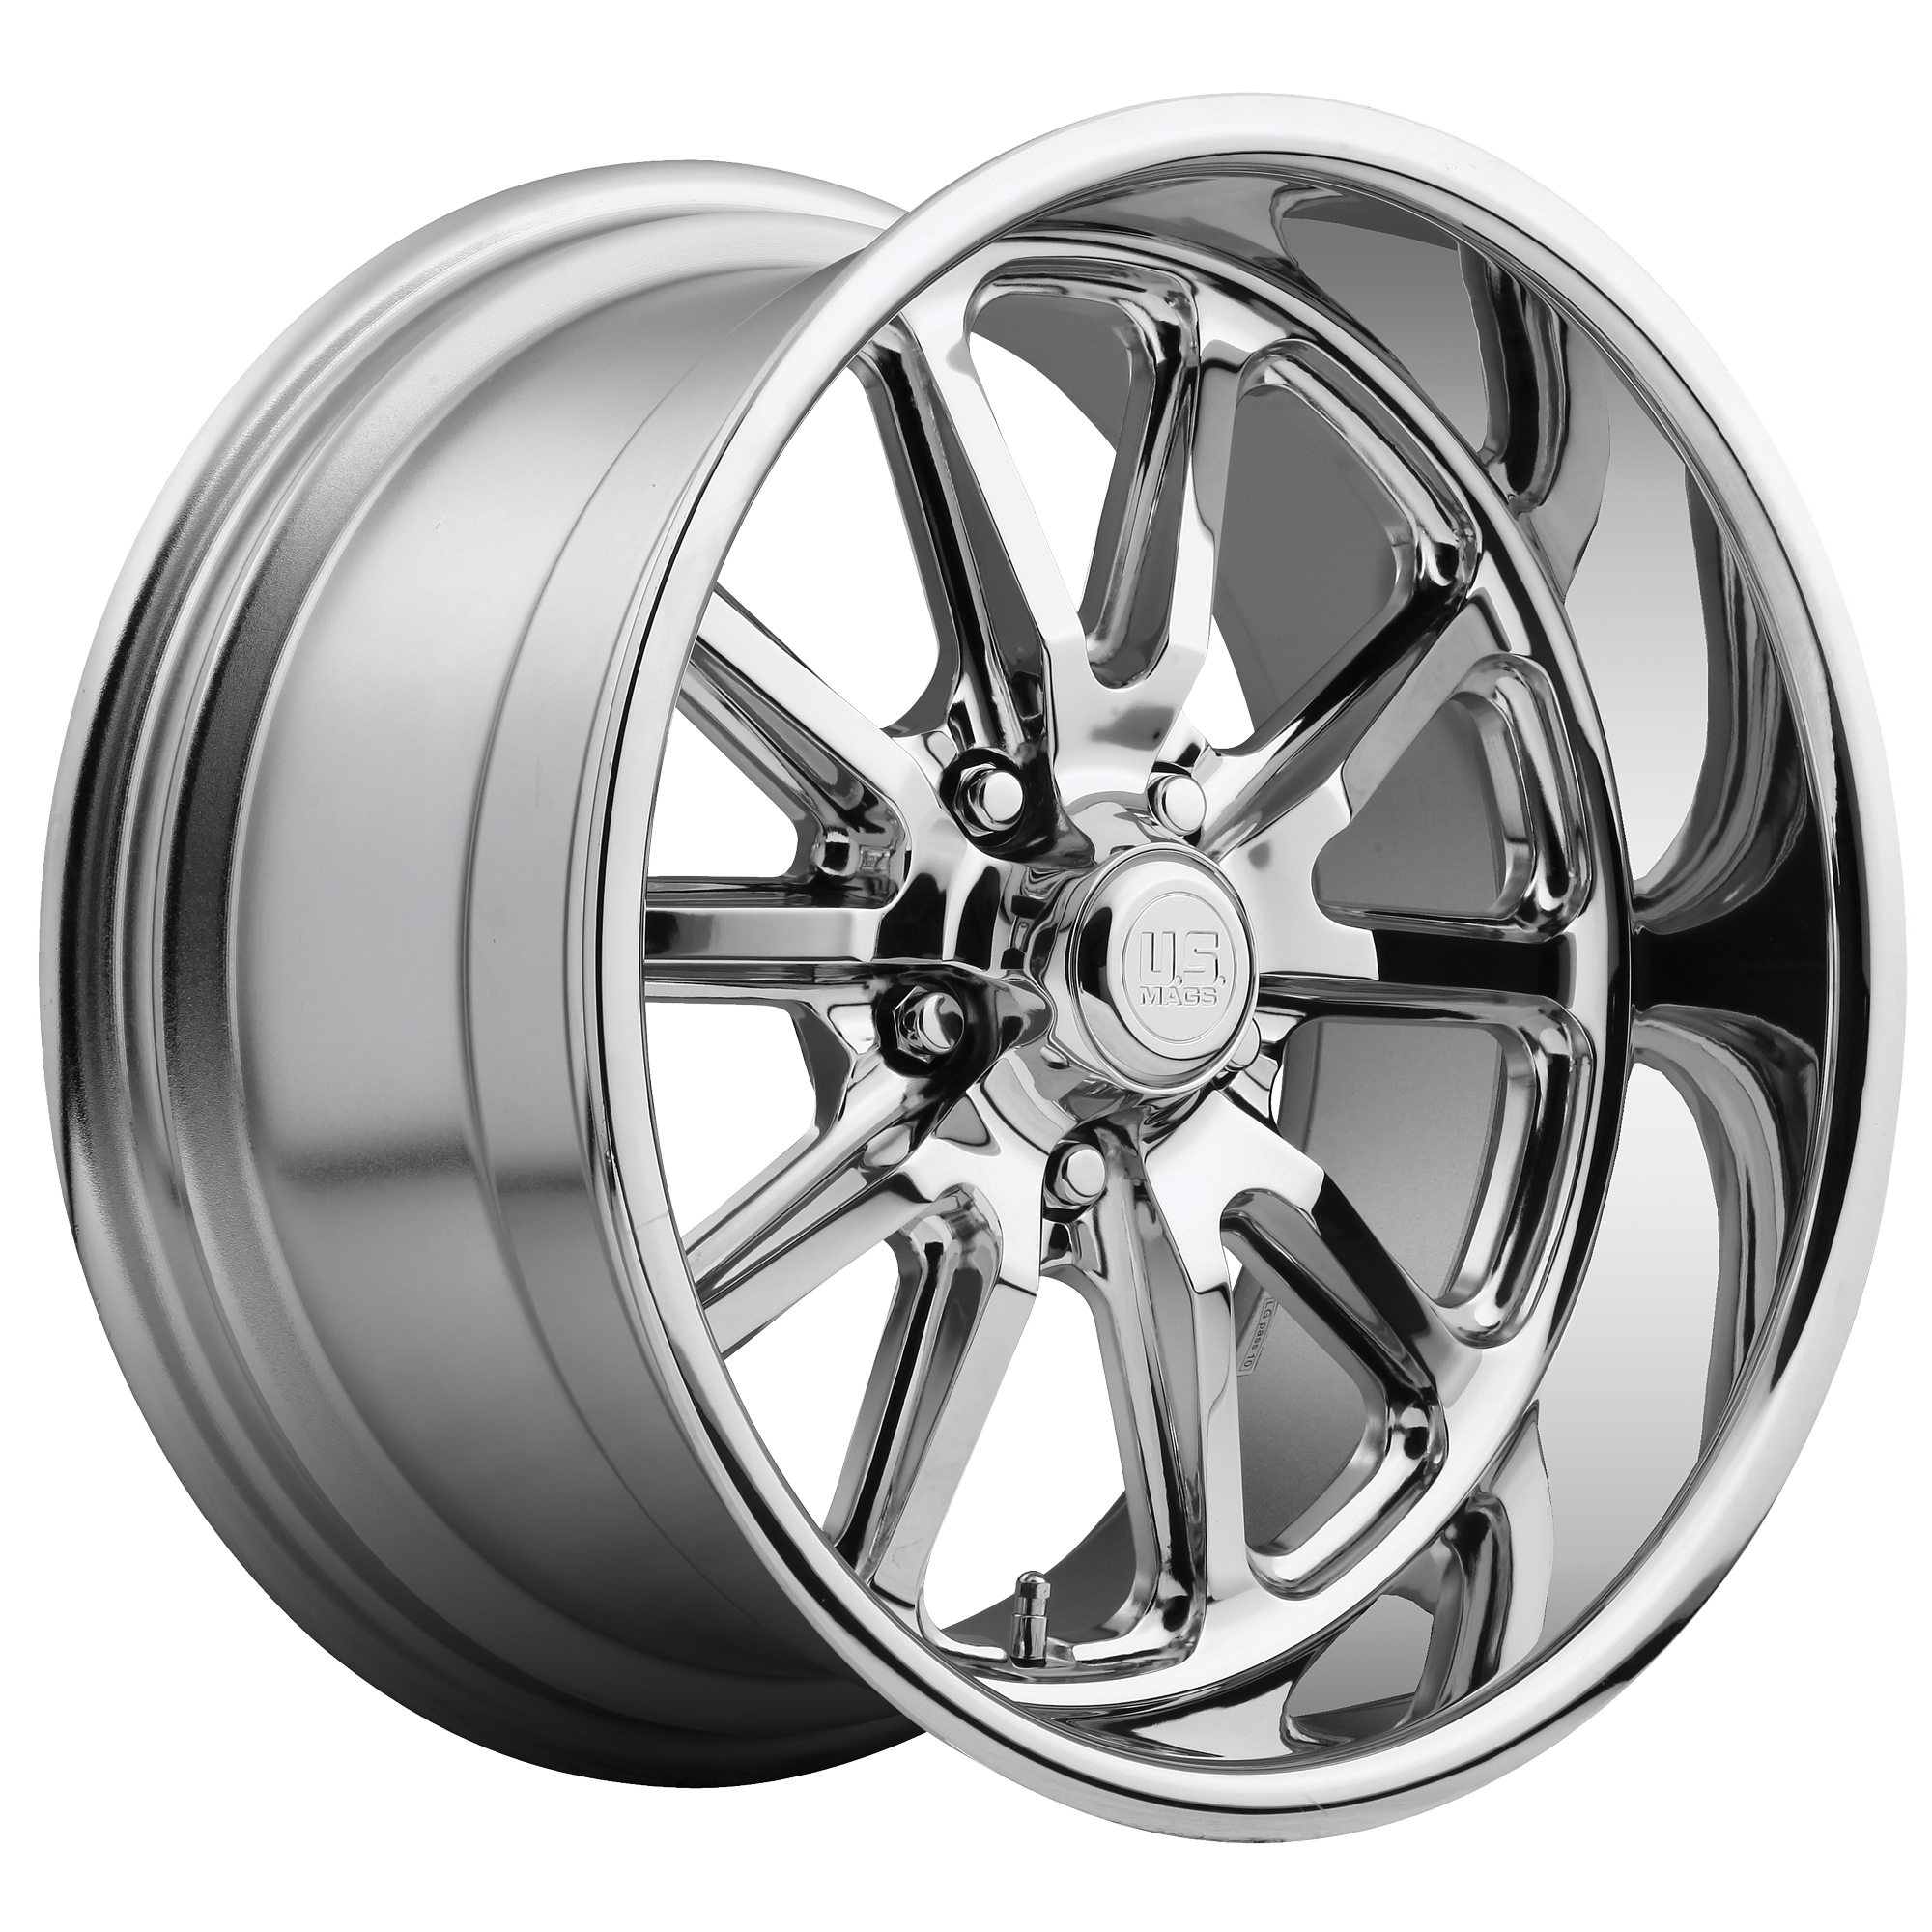 RAMBLER 15x8 5x114.30 CHROME PLATED (1 mm) - Tires and Engine Performance